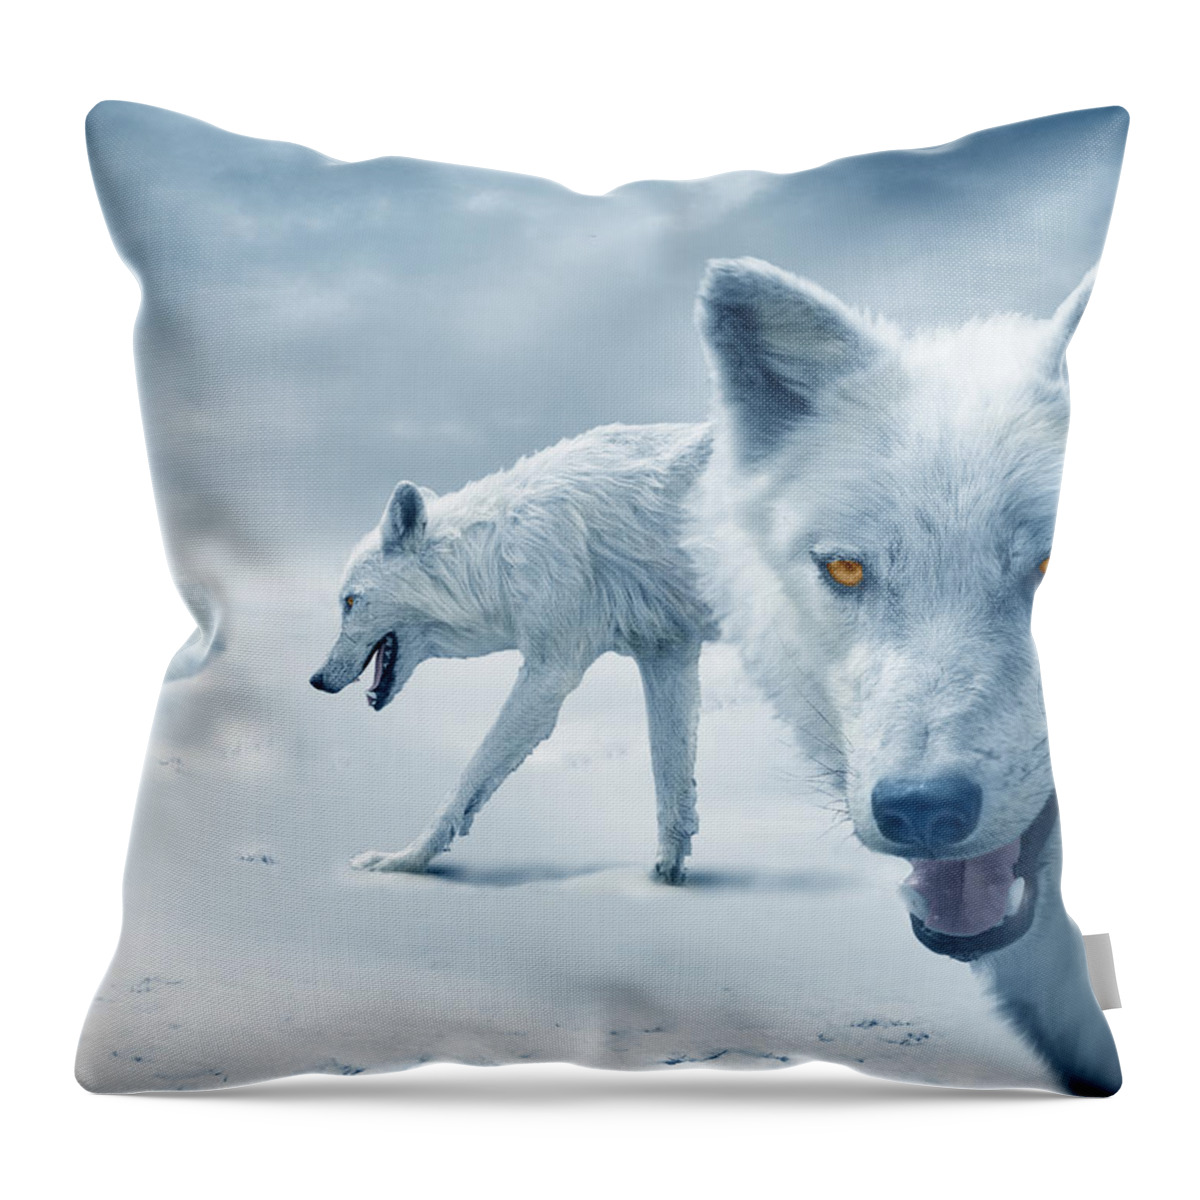 Arctic Throw Pillow featuring the photograph Arctic Wolves by Mal Bray